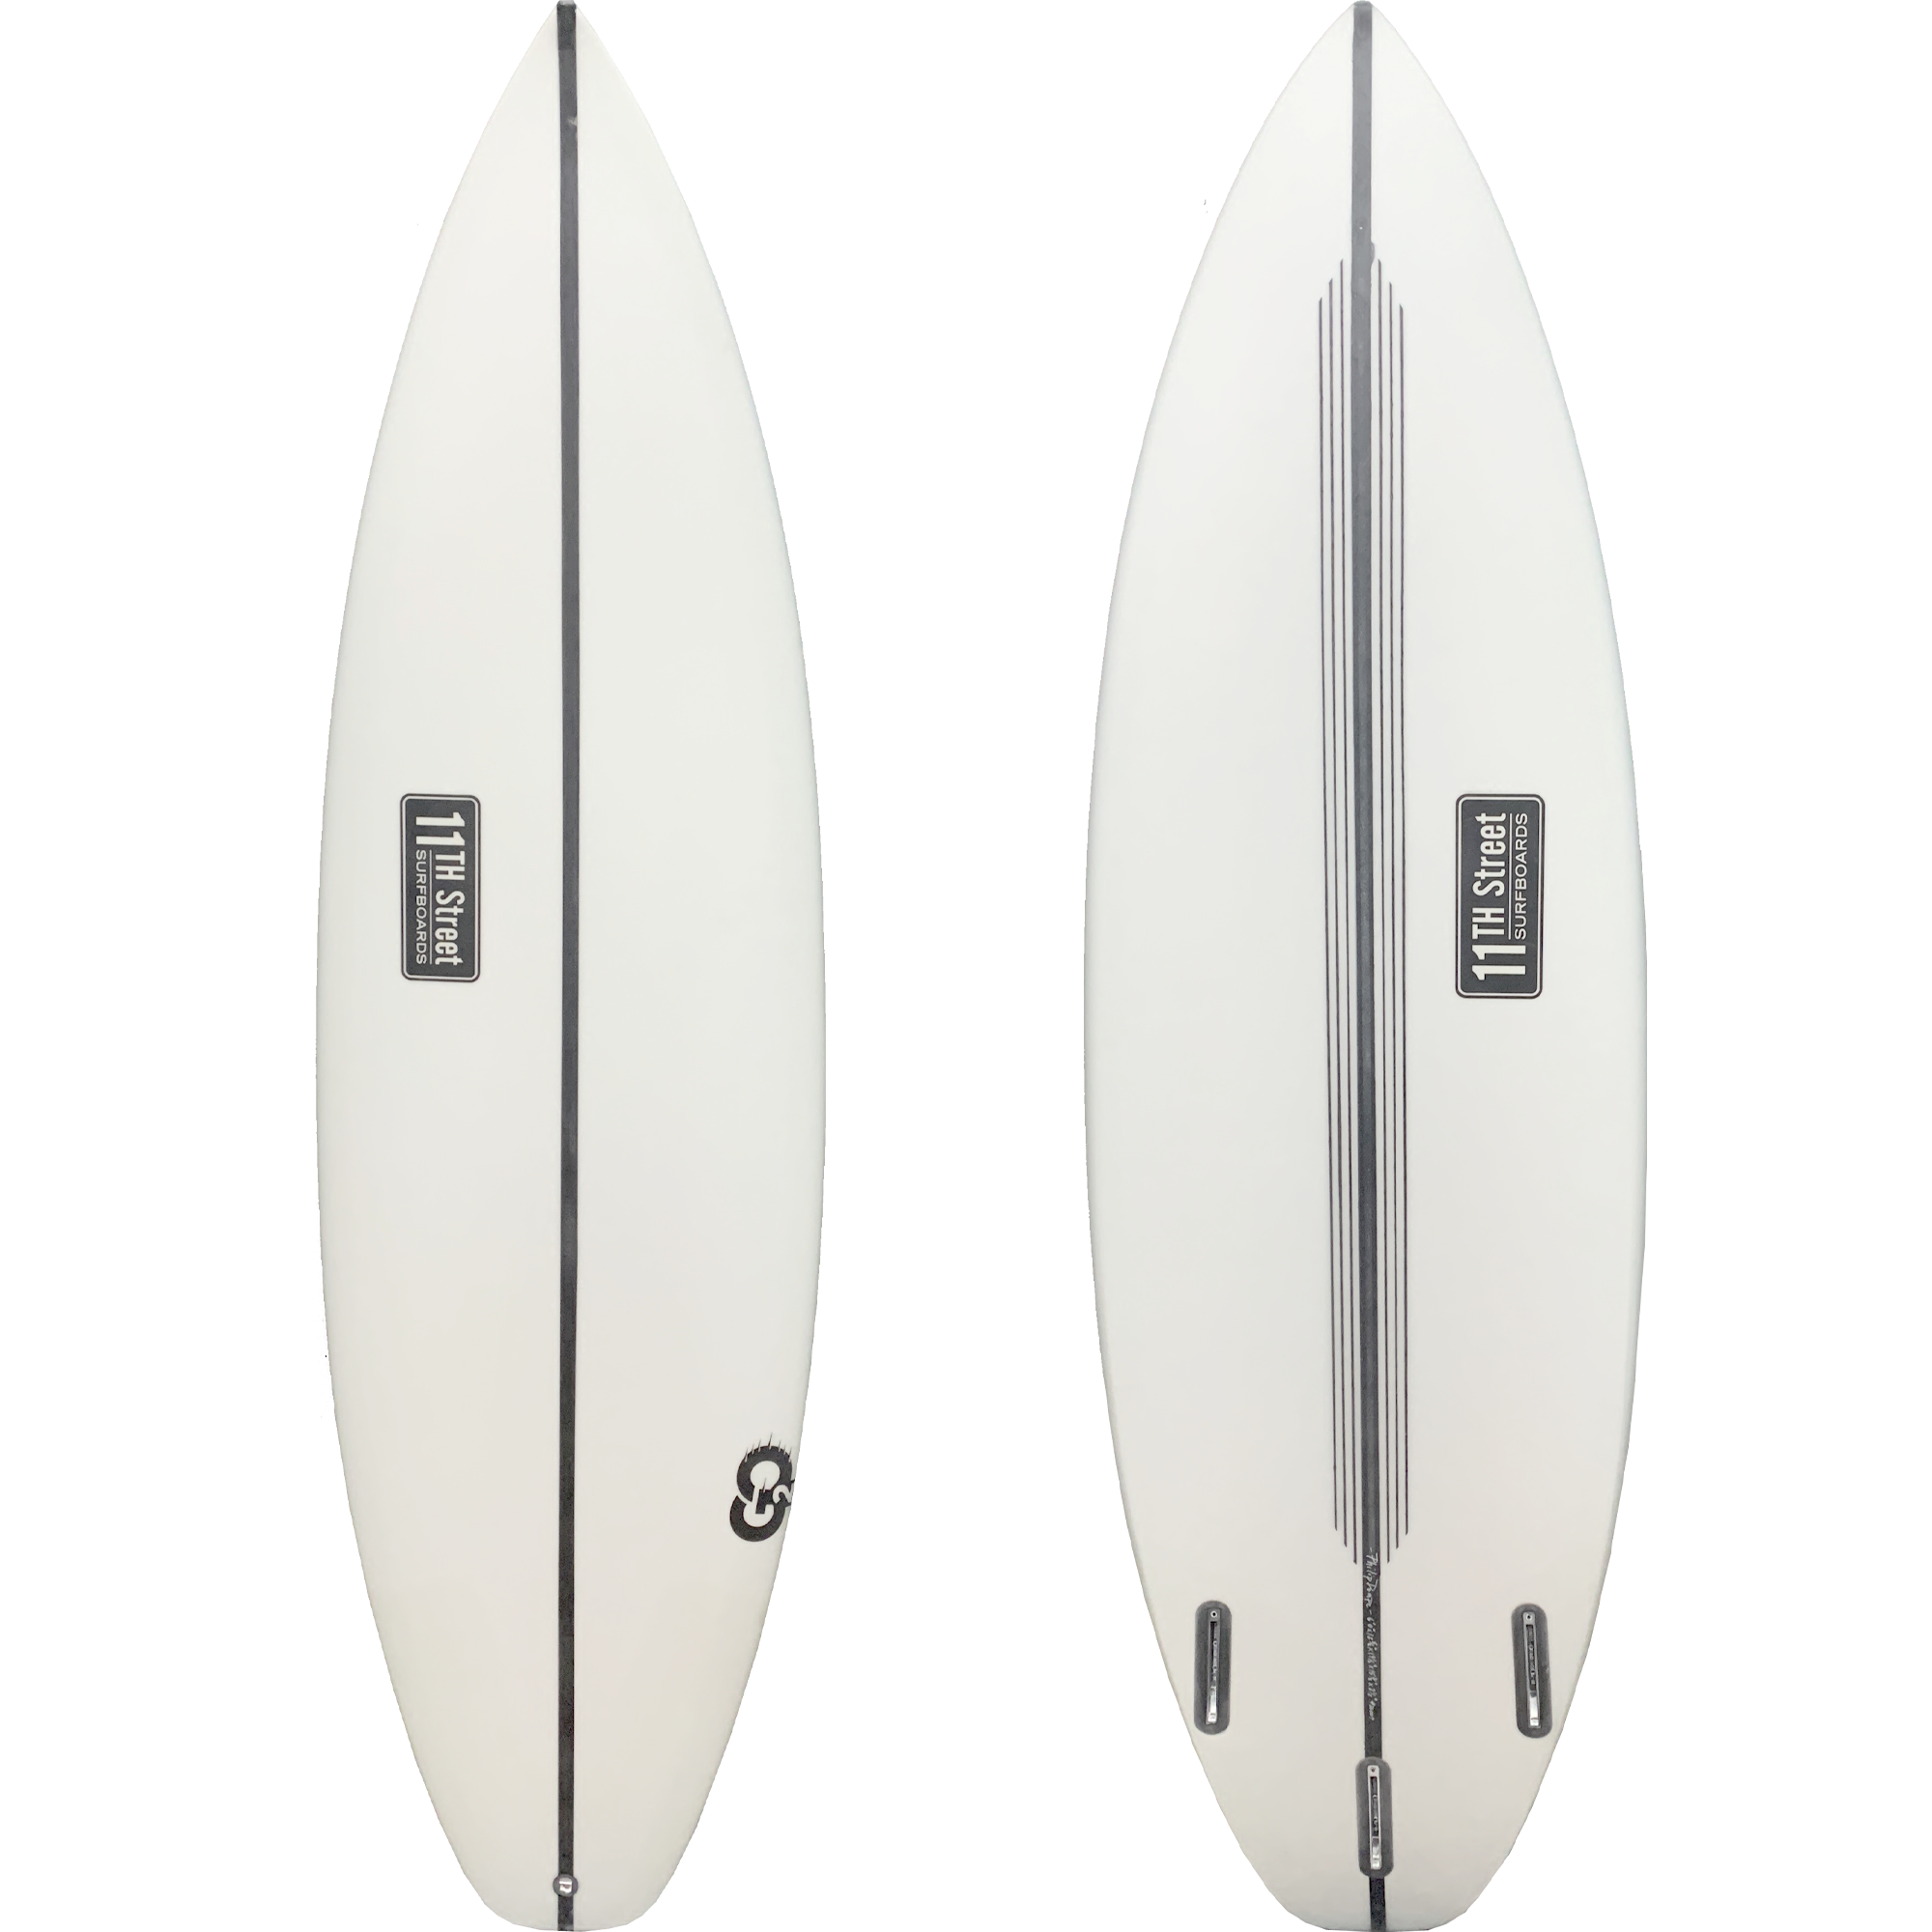 11th Street Surfboards GO2 EPS Surfboard - Futures